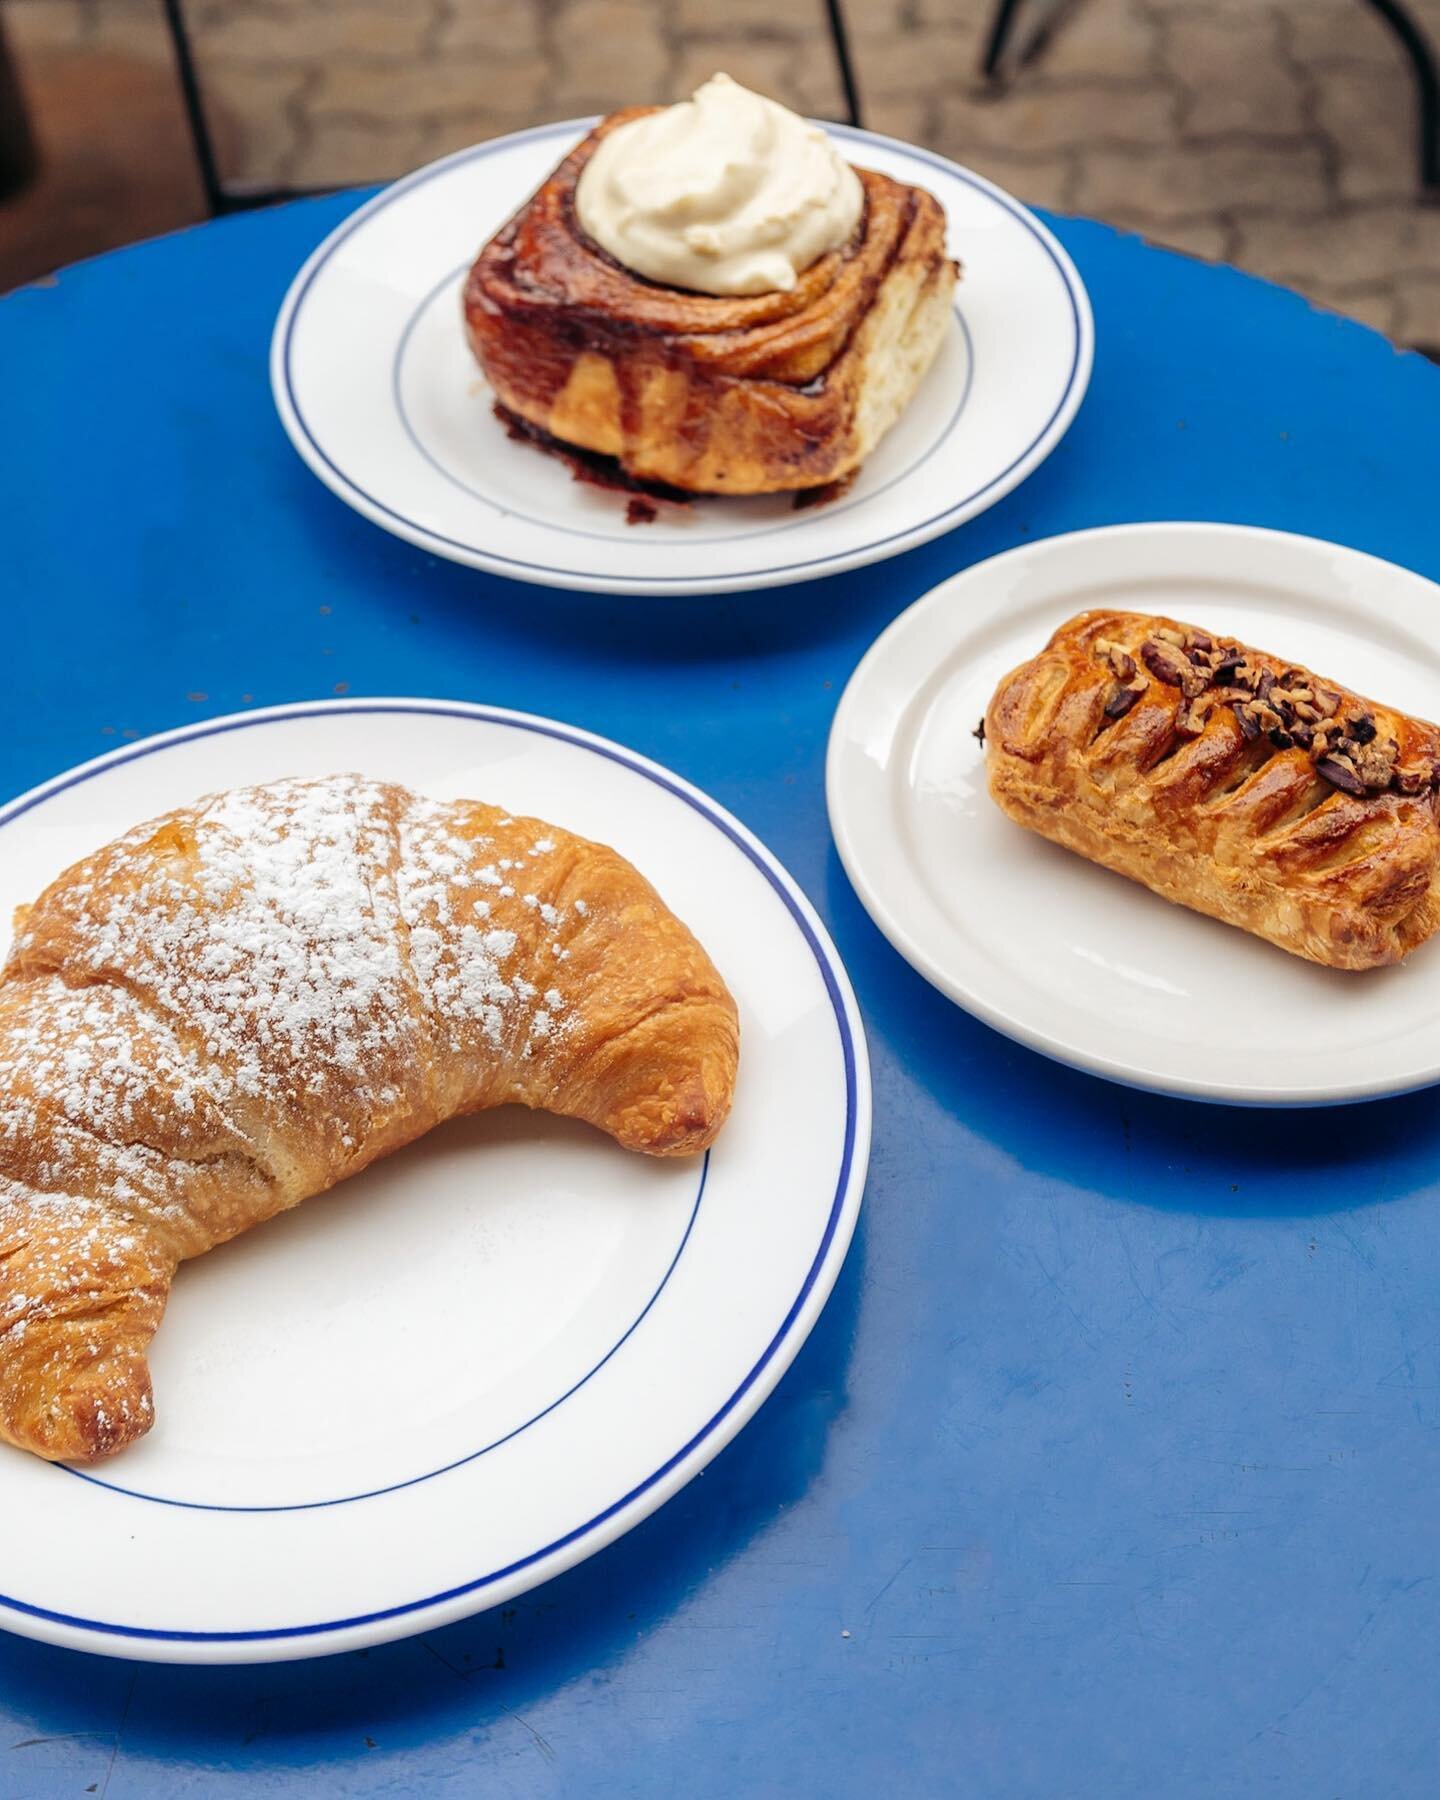 Enjoy the little things, come grab a lil&rsquo; pastry before those morning laps. 😋